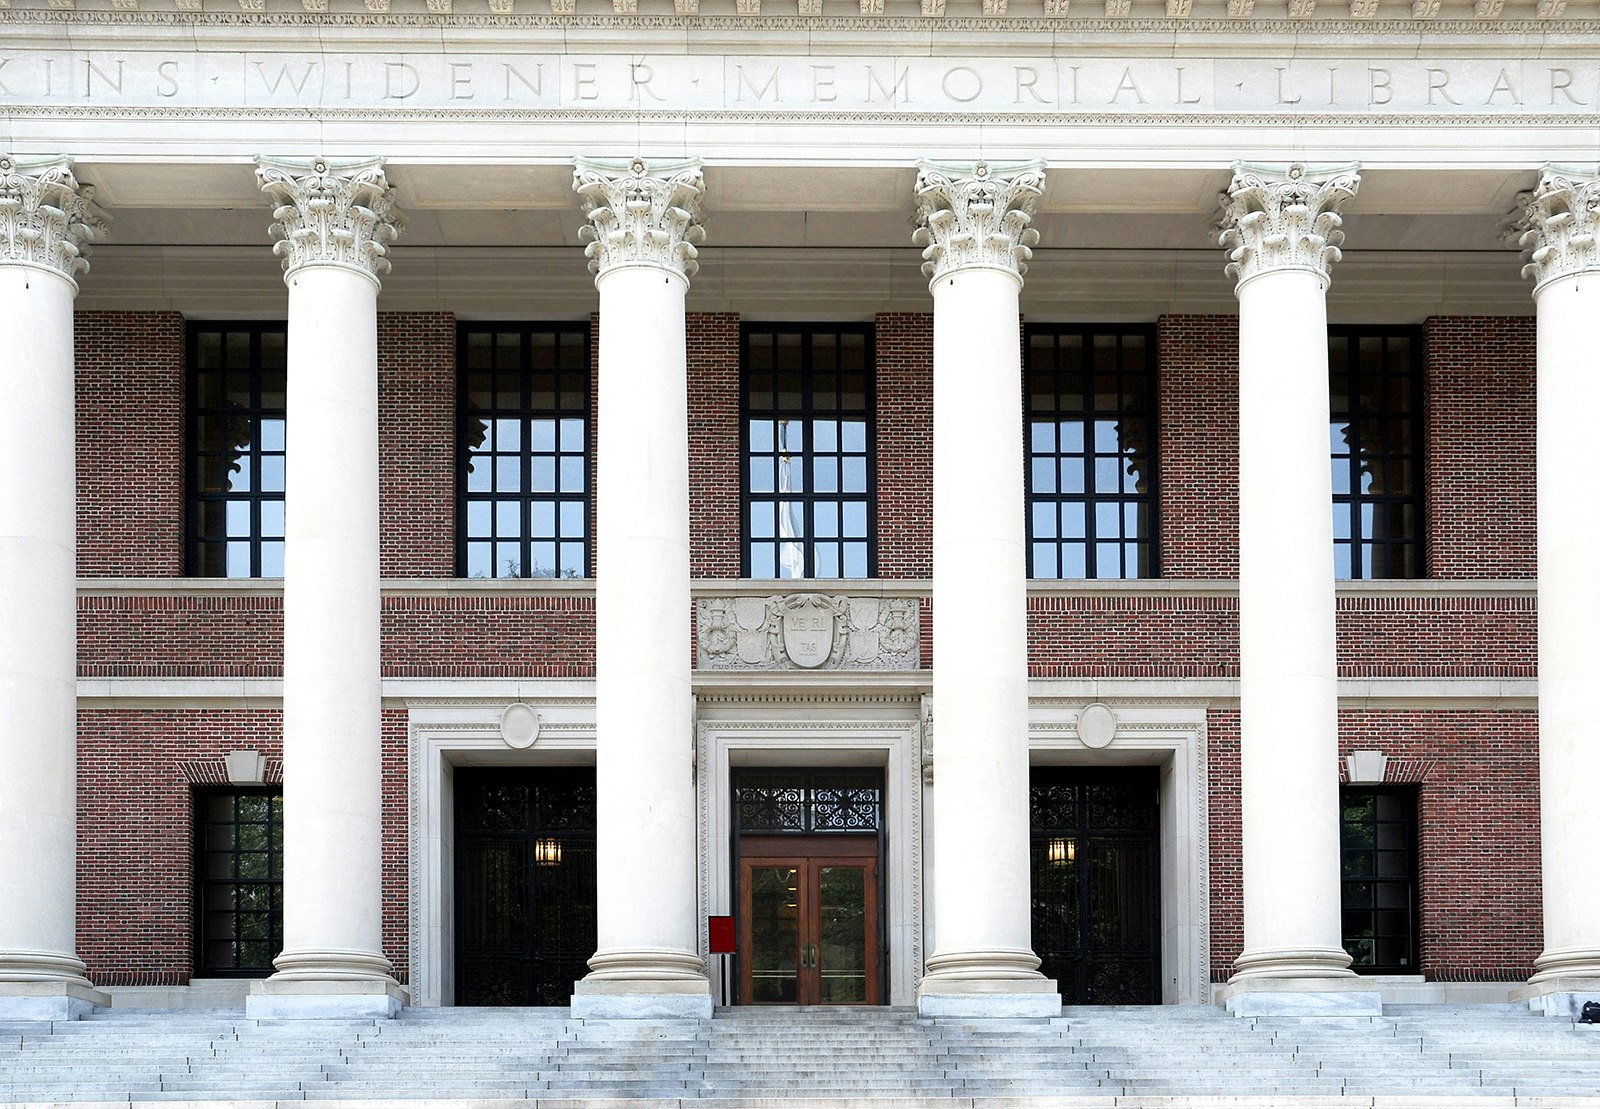 Tight shot of the facade of Weidner Library at Harvard, a Neoclassical structure with corinthian columns